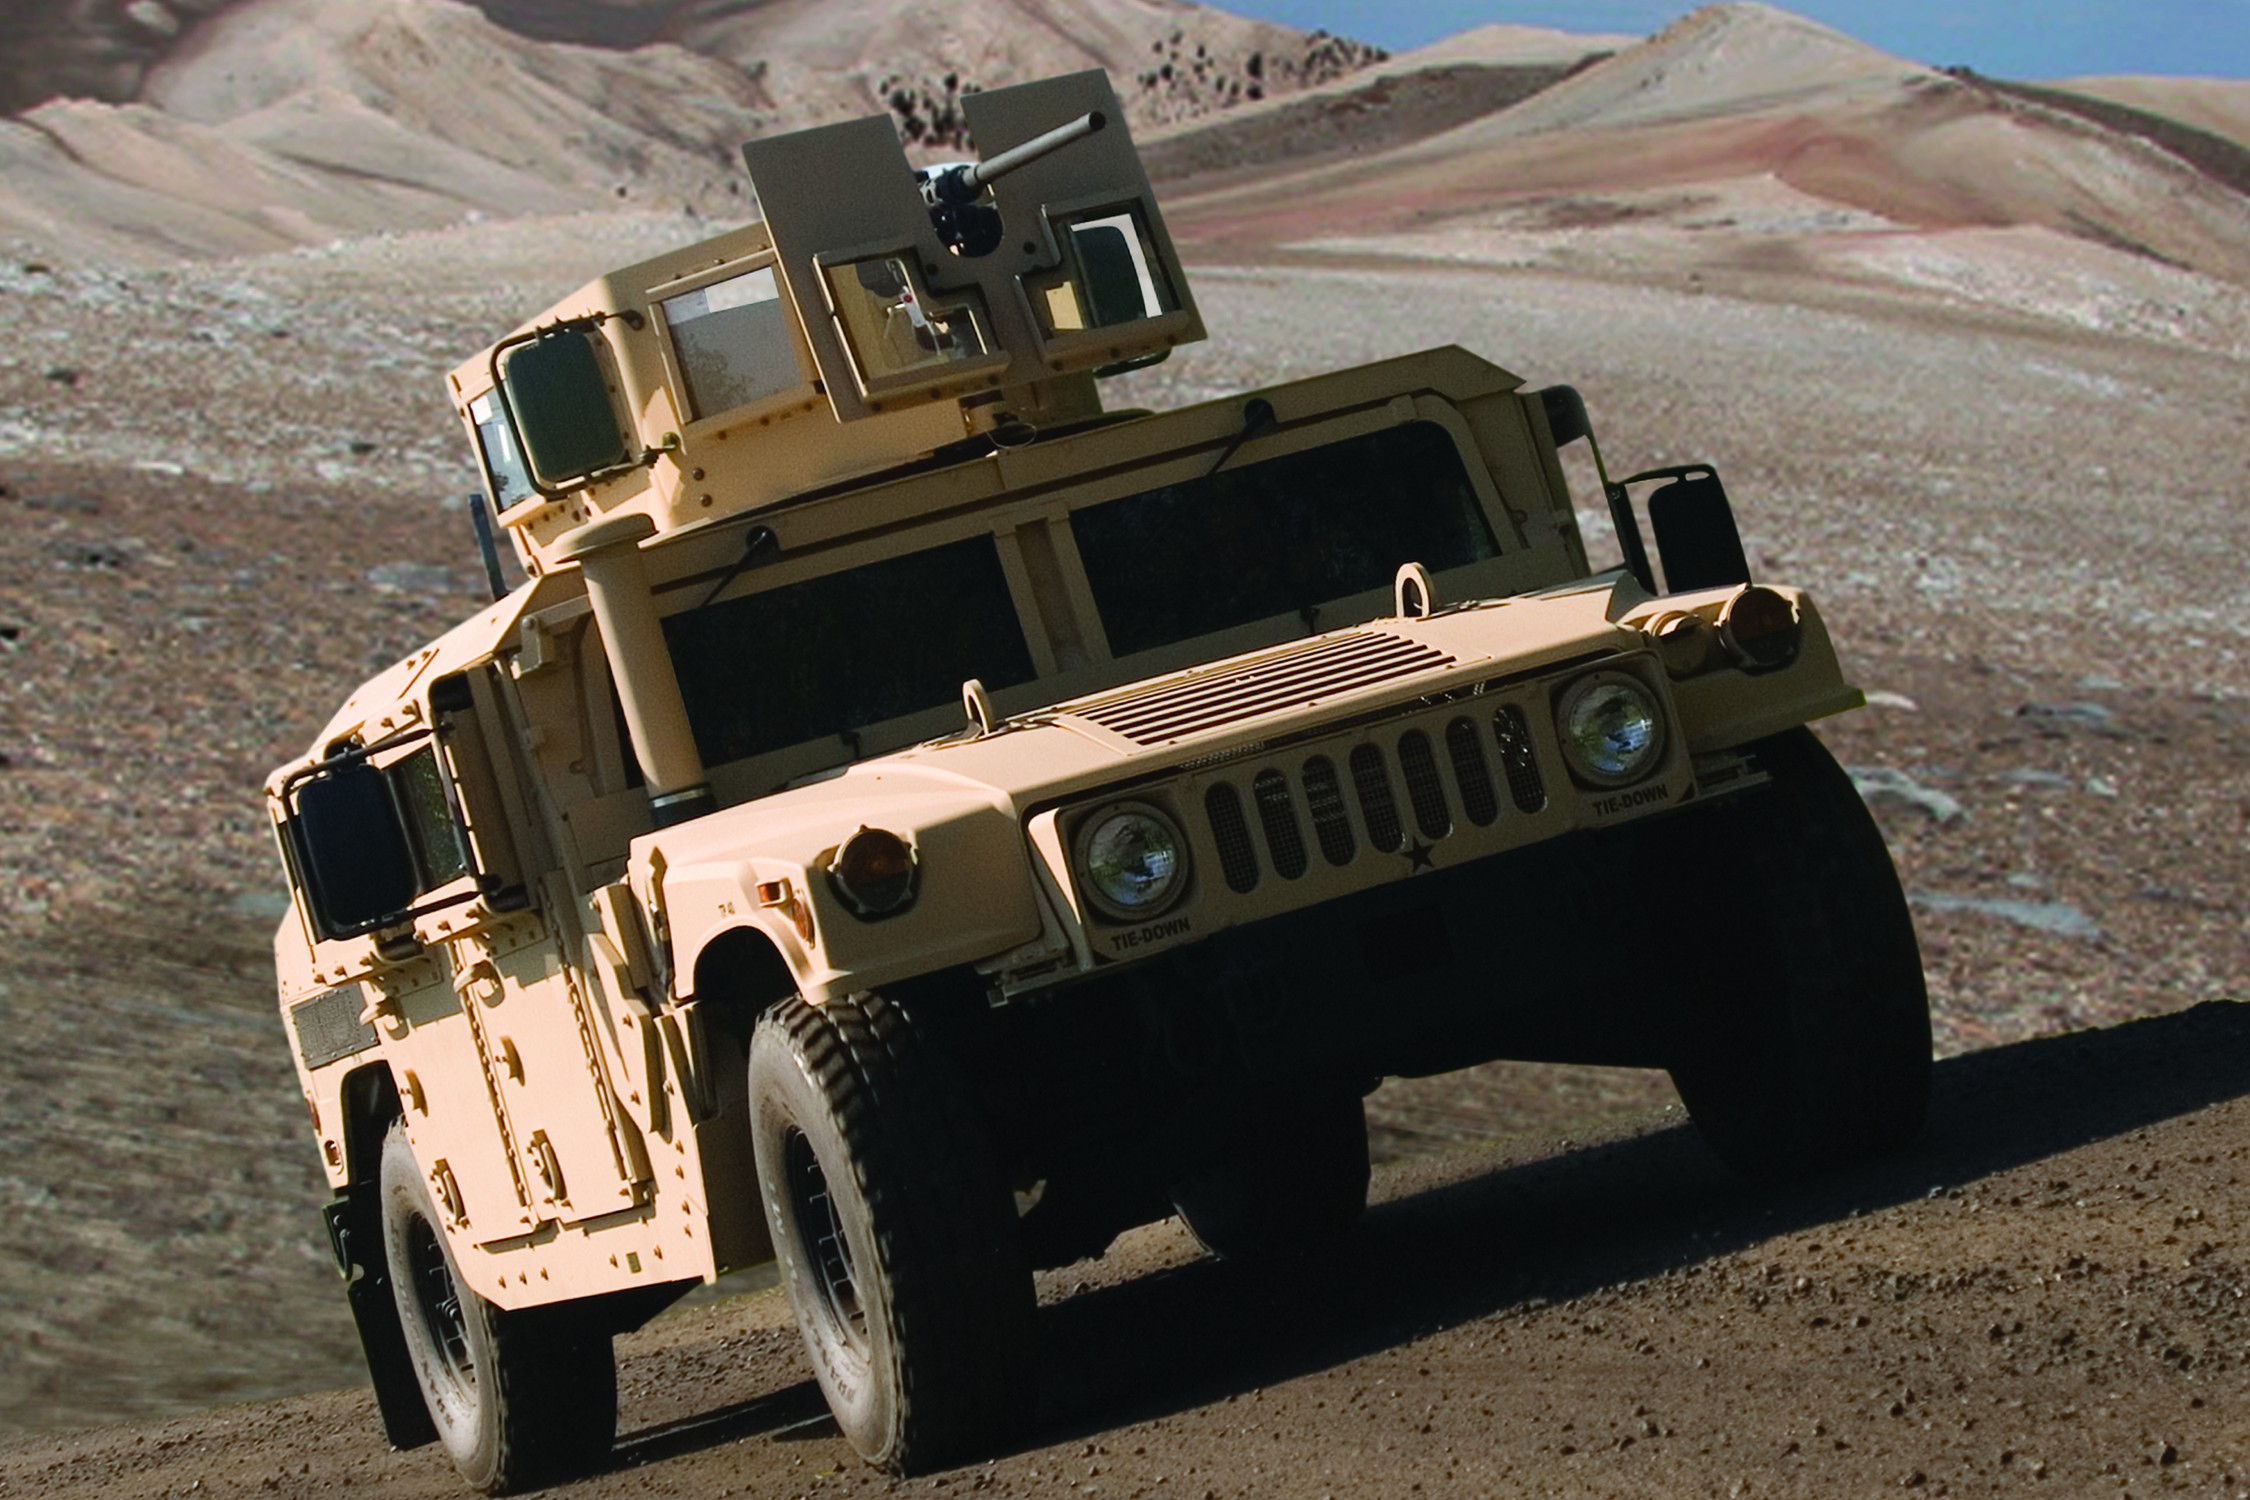 AM General received $733 million to produce Humvee in Expanded Capacity Vehicle for U.S. Army